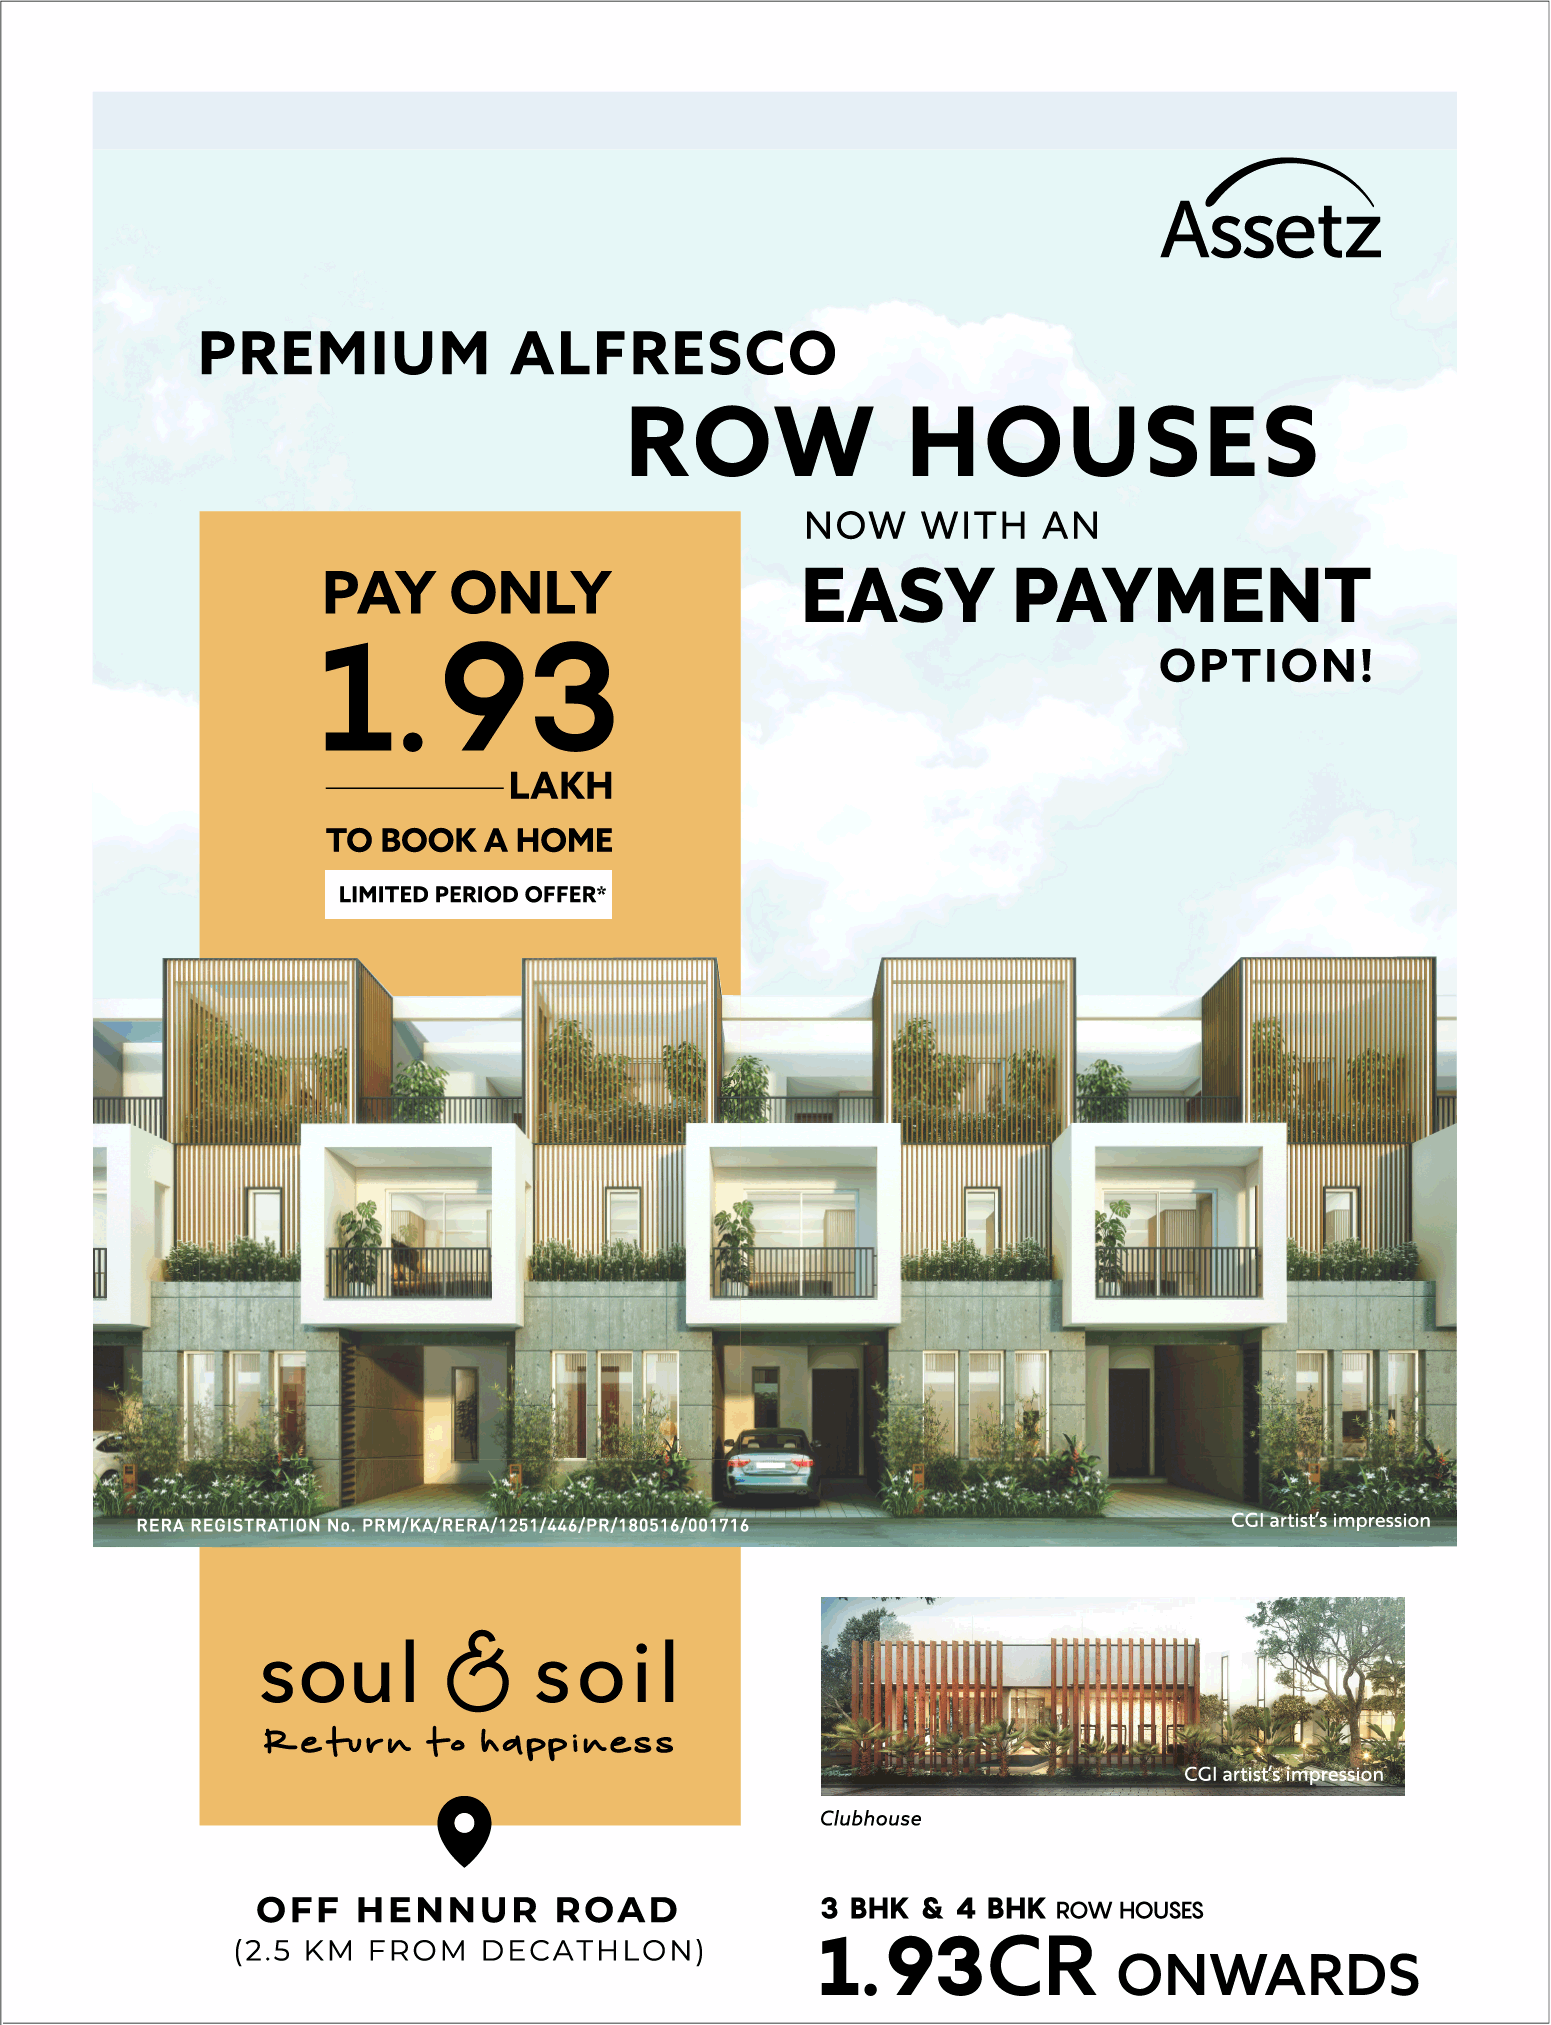 Book premium alfresco row house with an easy payment option at Assetz Soul & Soil in Bangalore Update